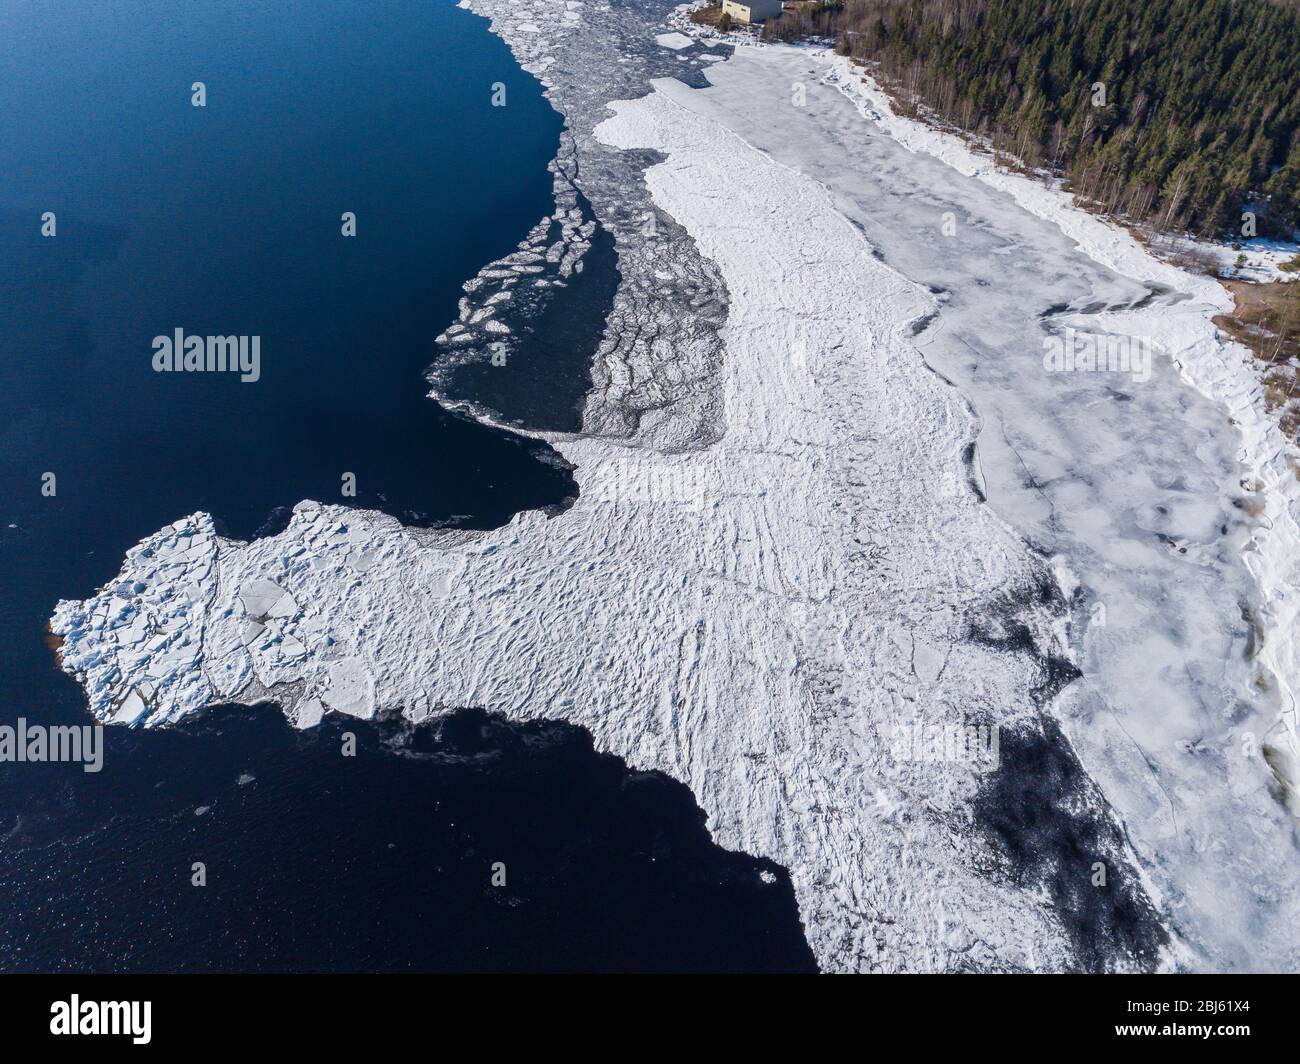 Aerial view of the shoreline of the lake and pieces of melting ice along the shore Stock Photo